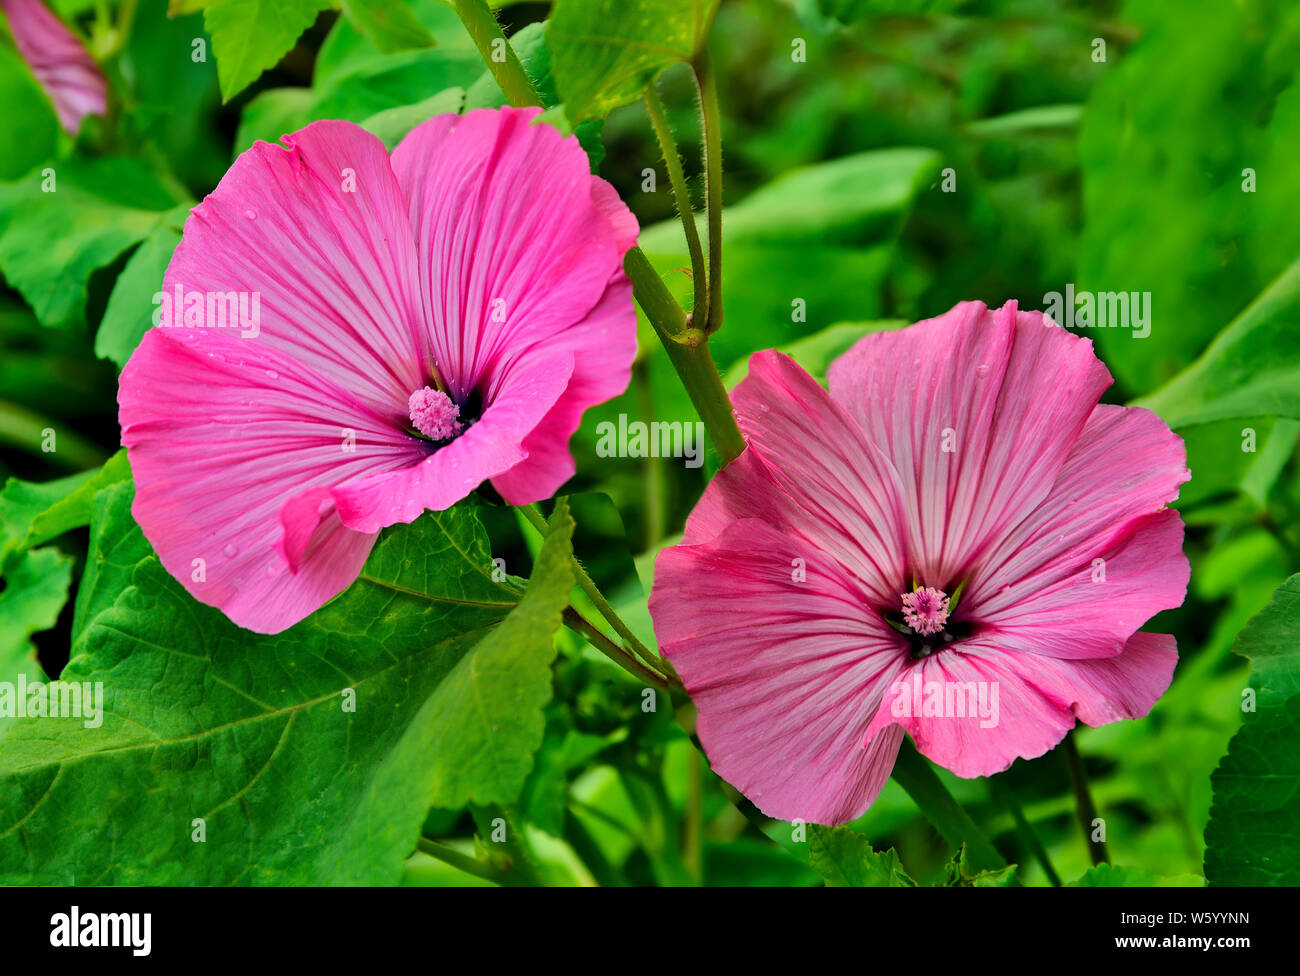 Two beautiful flowers of pink  Lavatera (malvaceae), or annual, rose, royal or regal  Mallow in garden close up. Gardening floriculture concept Stock Photo